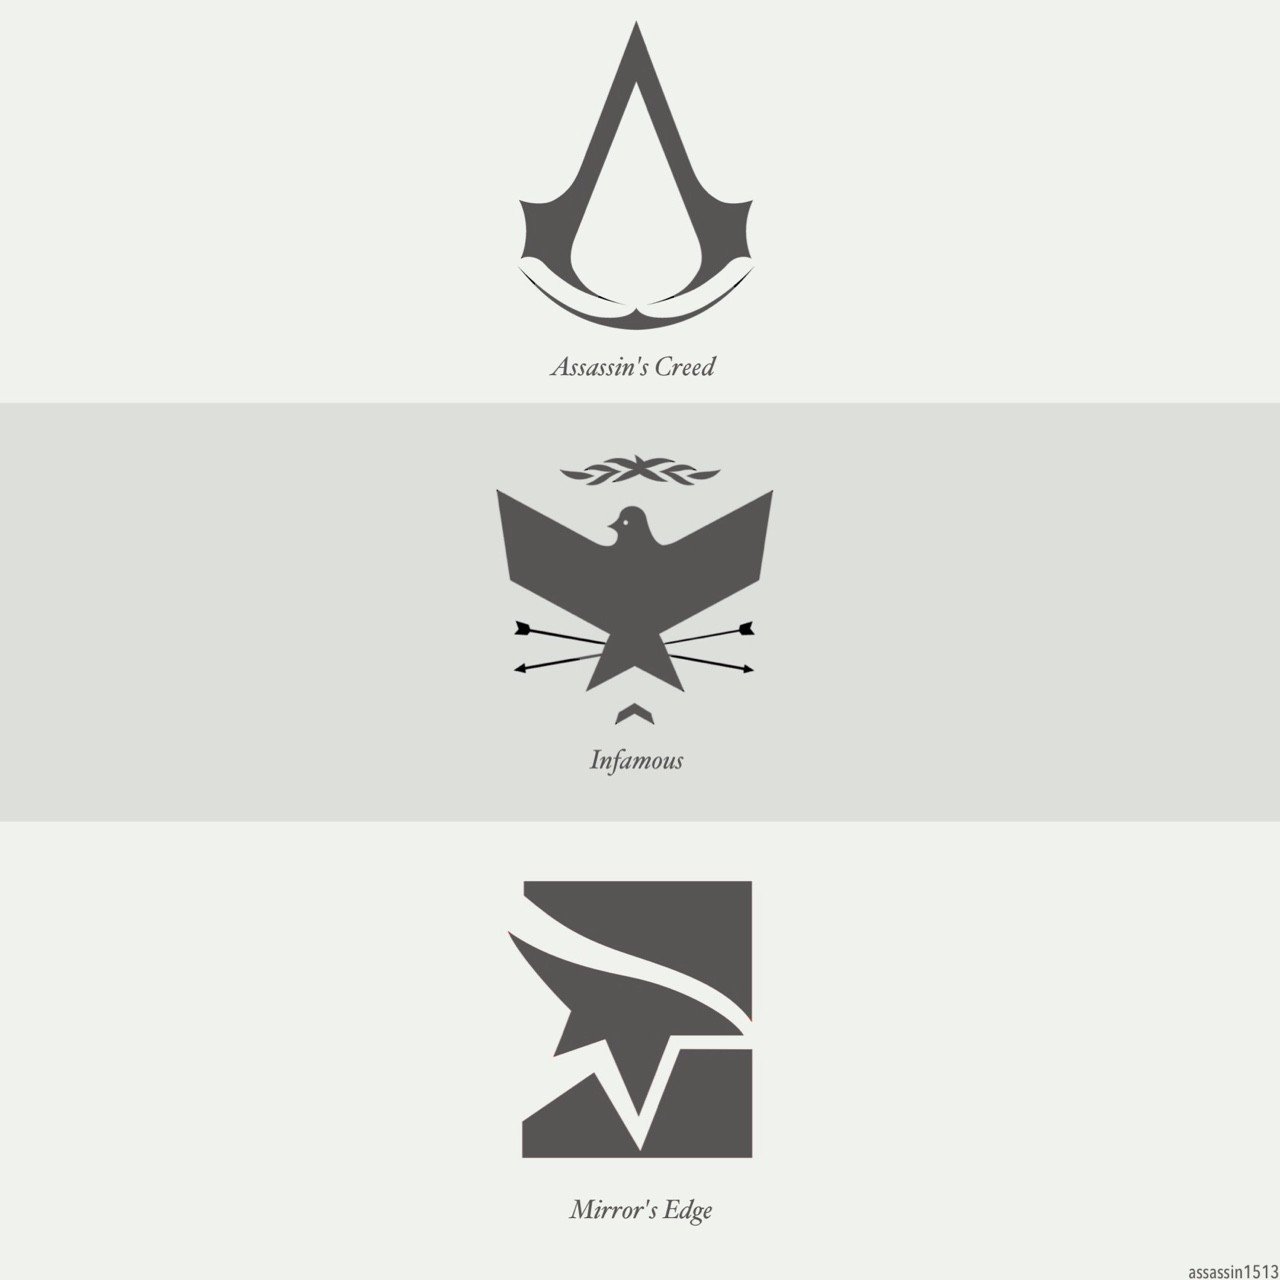 Watch the Photo by the5impleton with the username @the5impleton, who is a verified user, posted on December 14, 2017 and the text says 'assassin1513:

[Minimalistic Video Games Collection]
[Edits made by me :)] #assassins  #creed  #mirrors  #edge  #the  #witcher  #the  #elder  #scrolls  #skyrim  #deus  #ex  #half  #life  #zelda  #metal  #gear  #solid  #bioshock  #grand  #theft  #auto..'